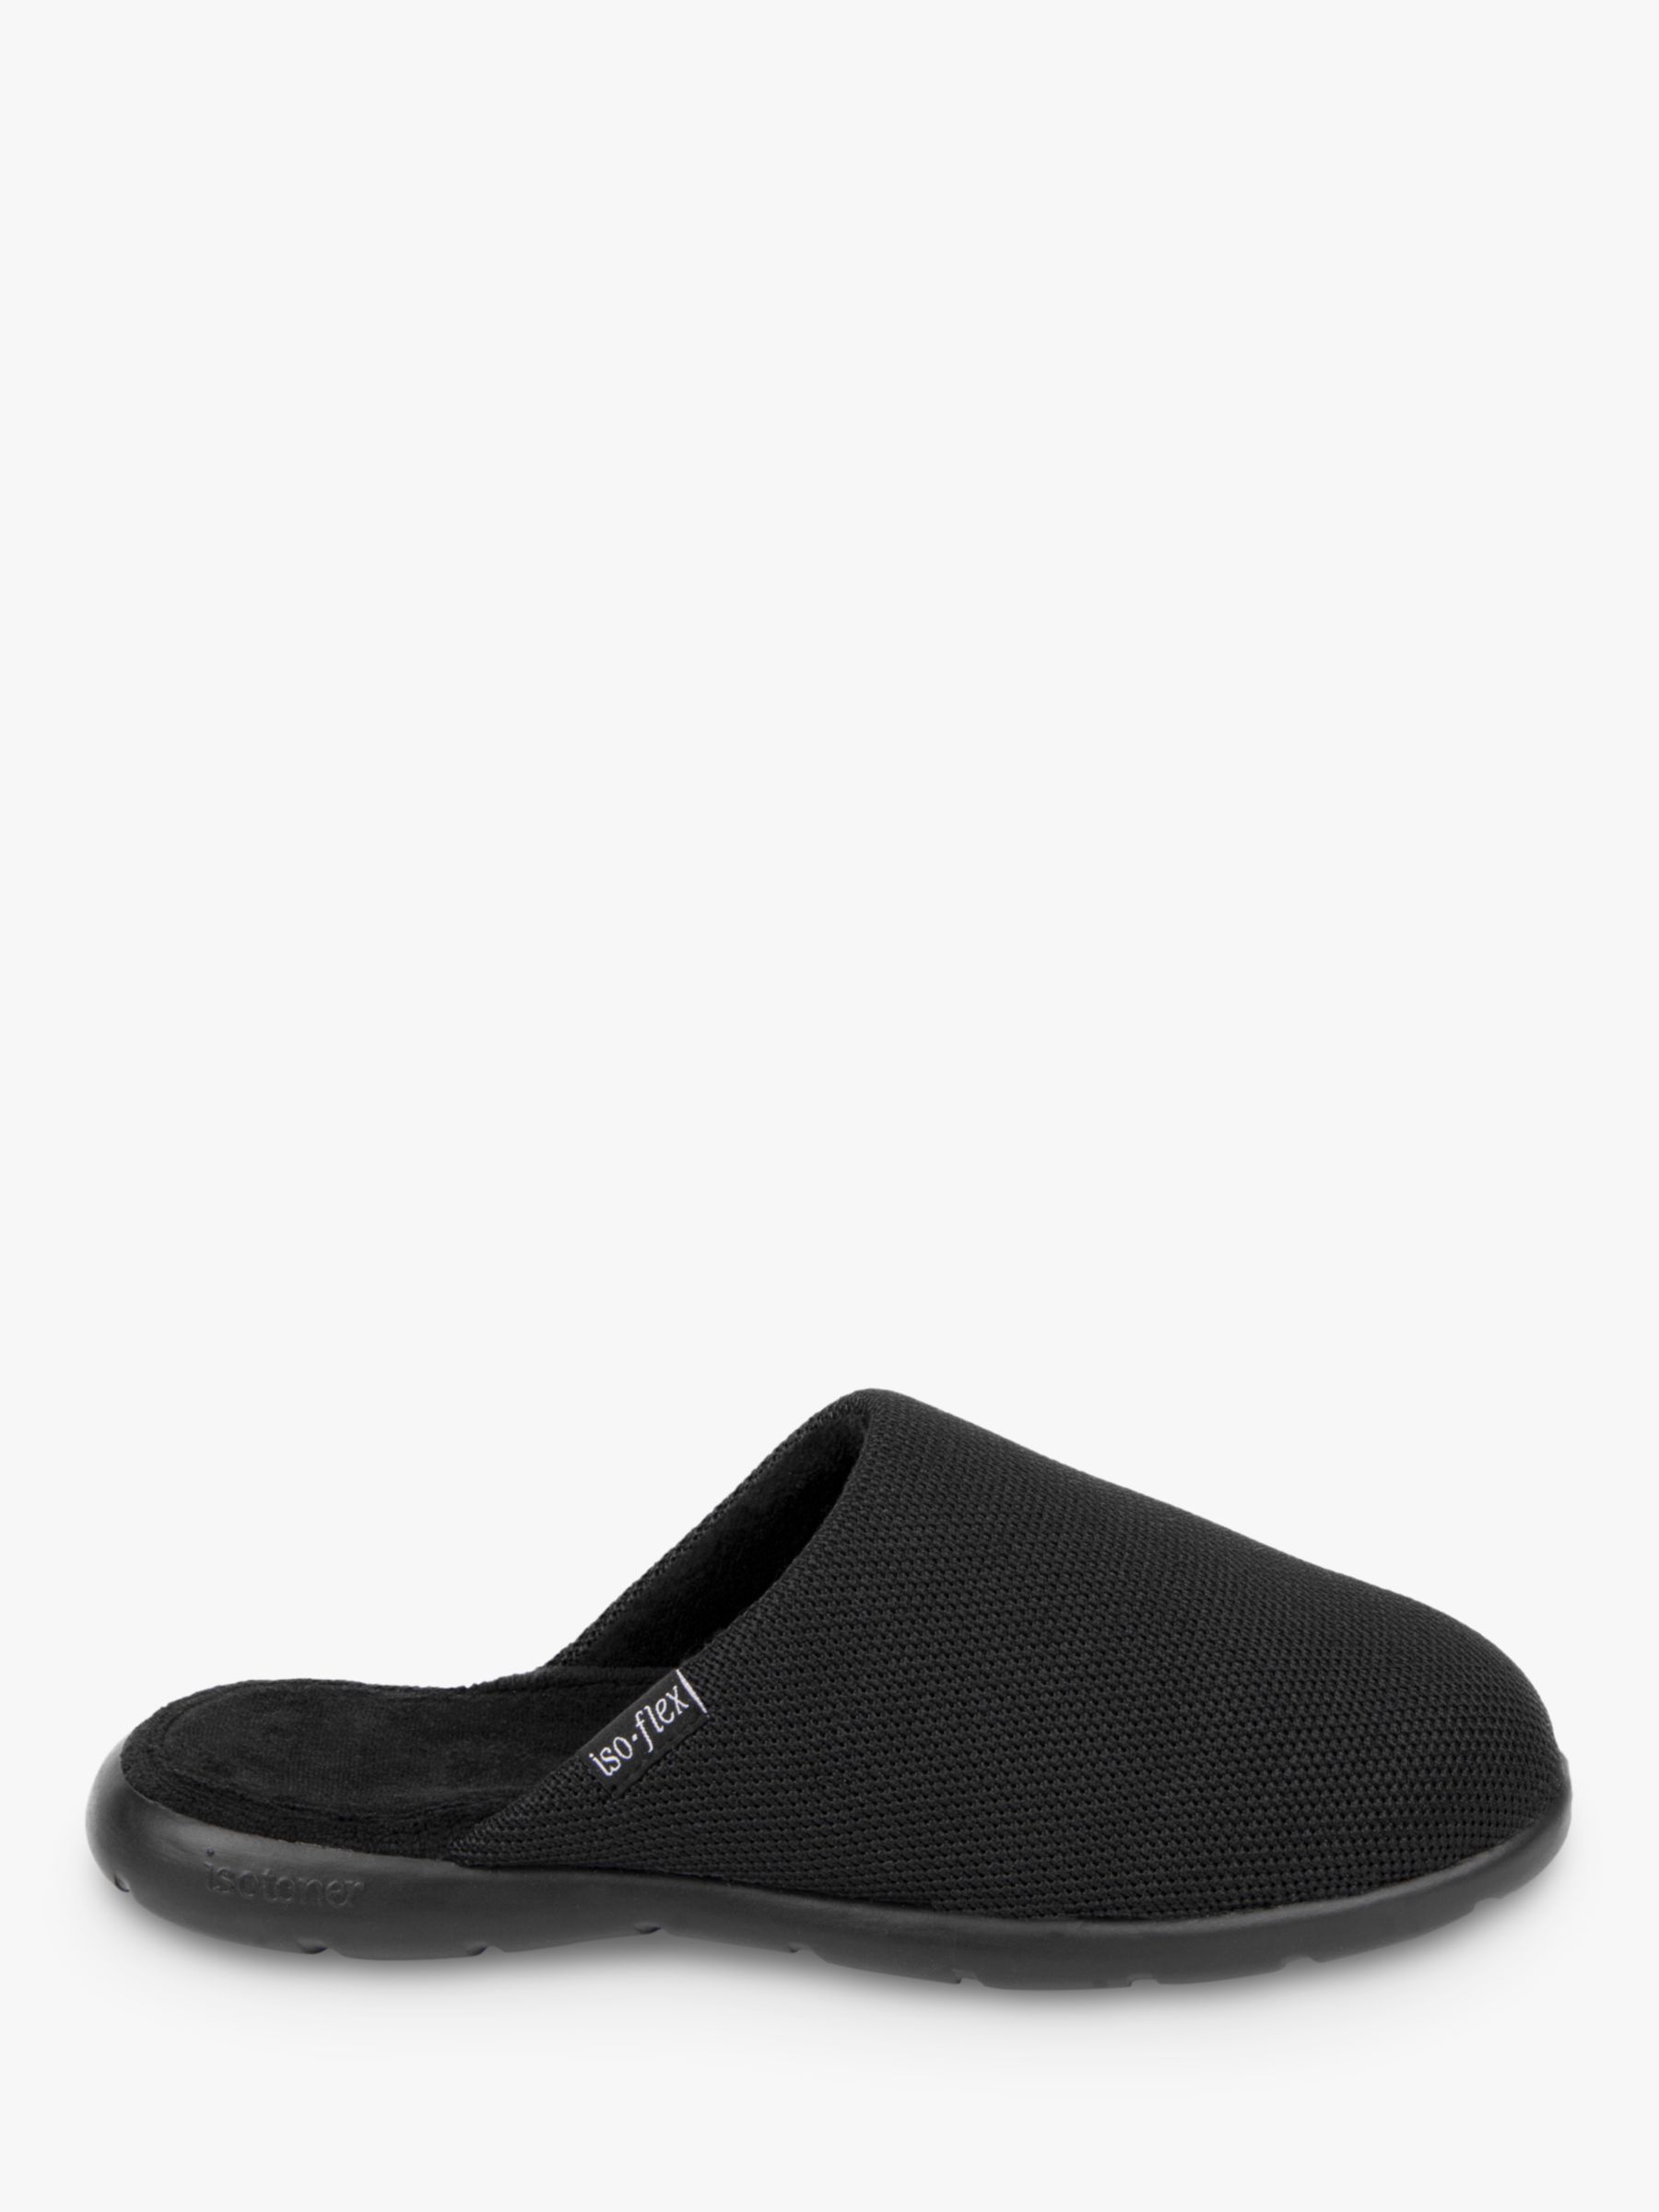 totes Iso Flex Textured Mule Slippers, Black, 8